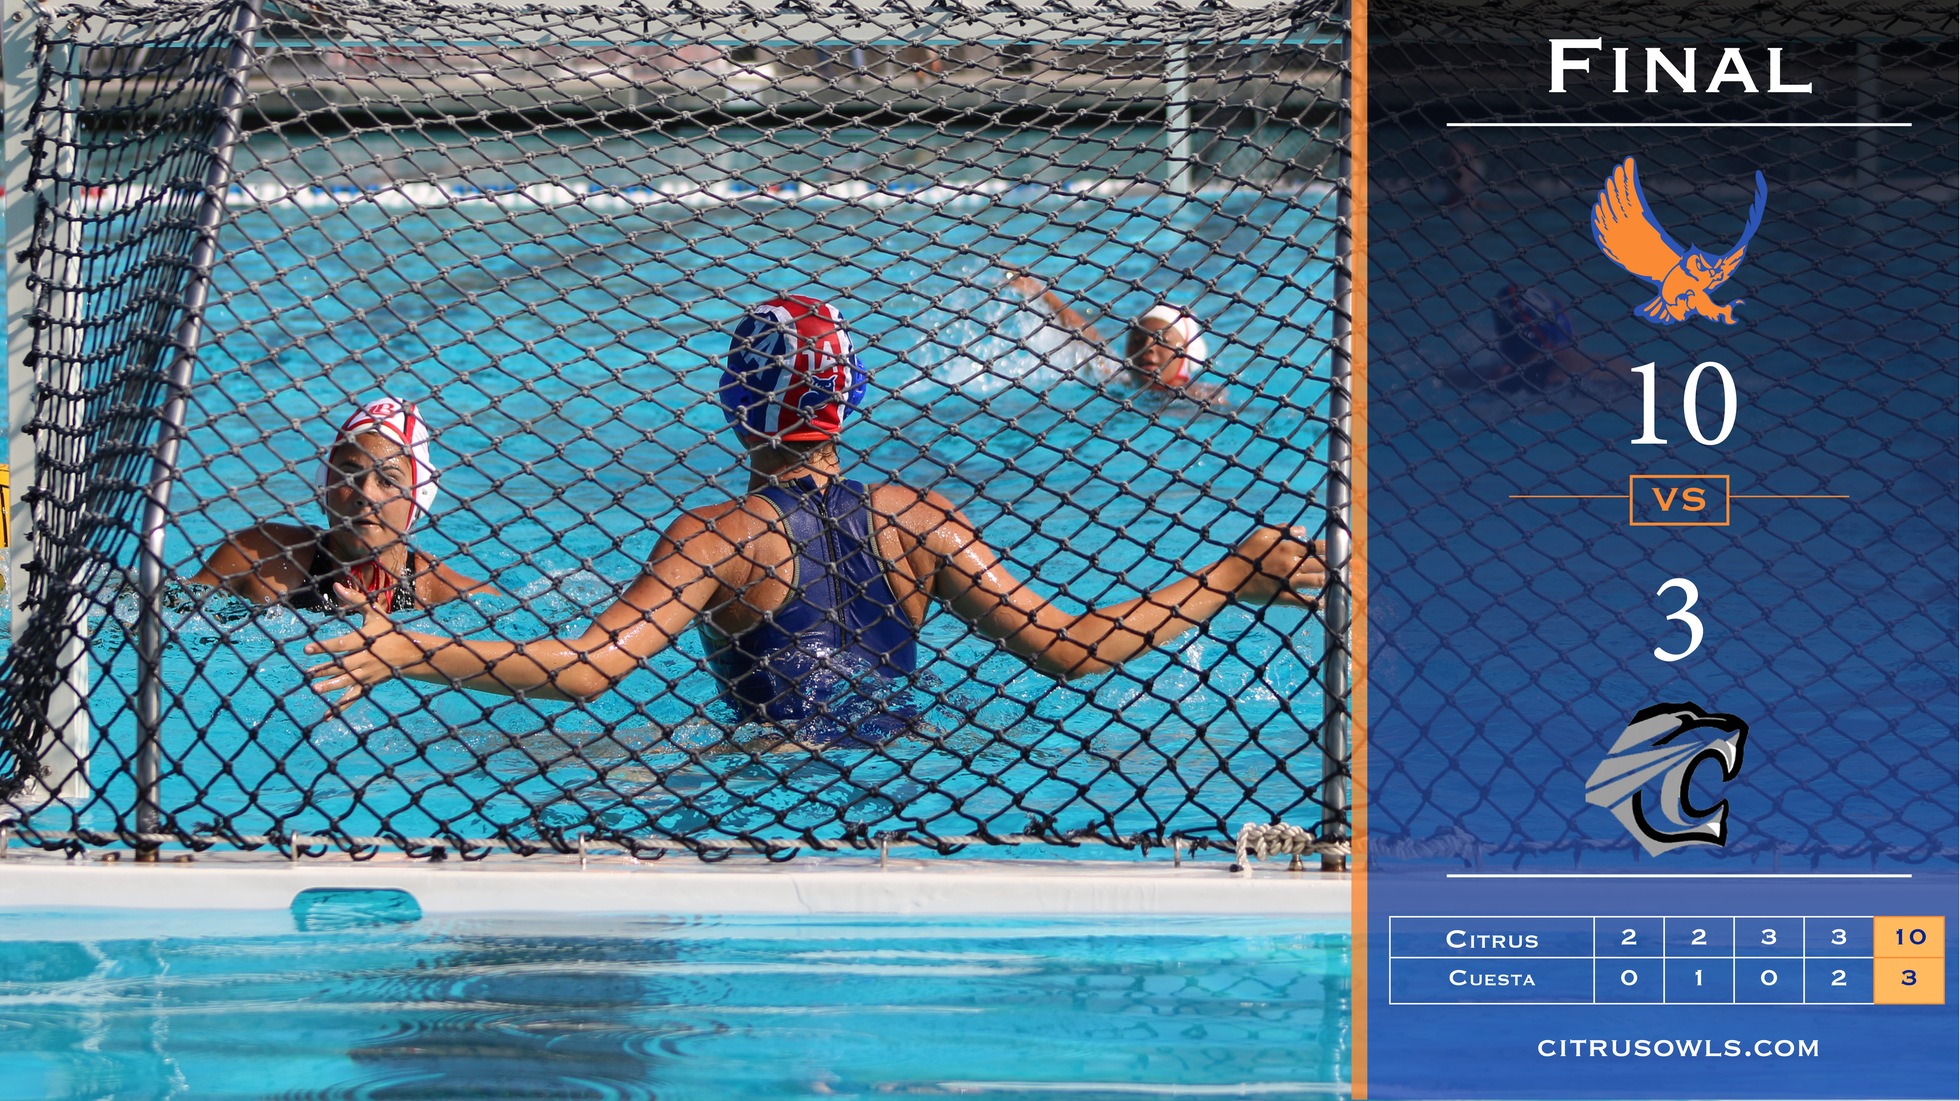 Women's Polo Tops Cuesta 10-3 To Move On To Confereence Final